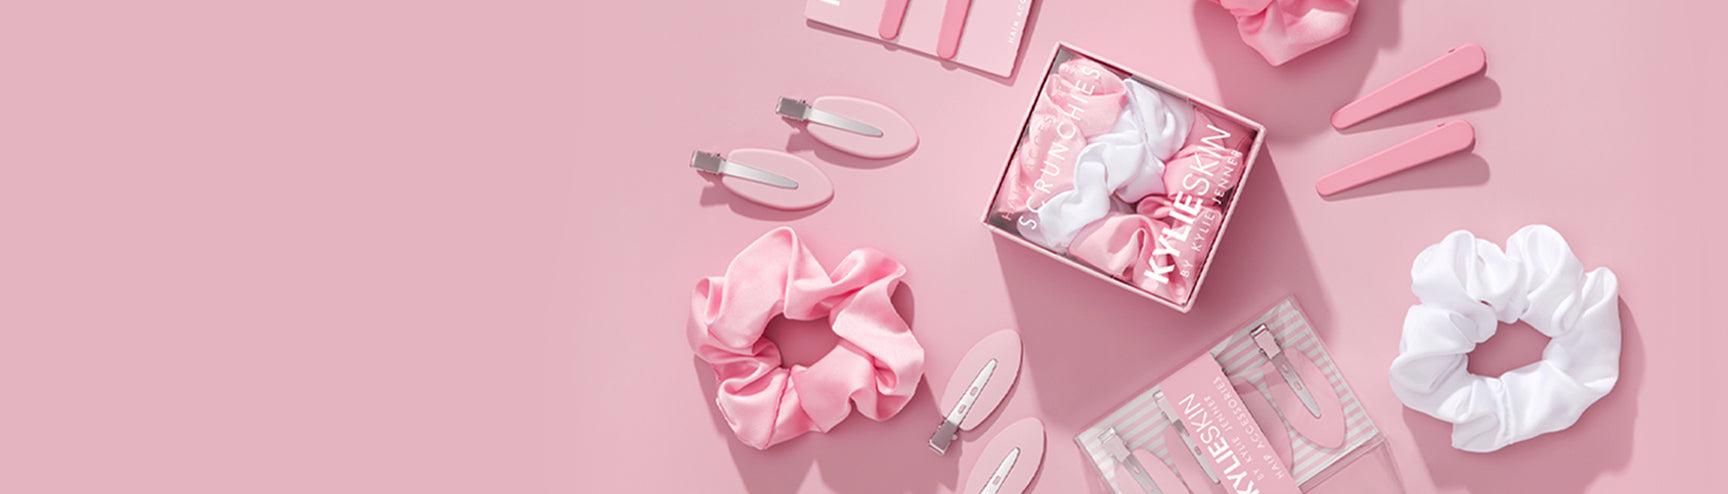 Kylie Cosmetics - Tools & Accessories - Hair Accessories